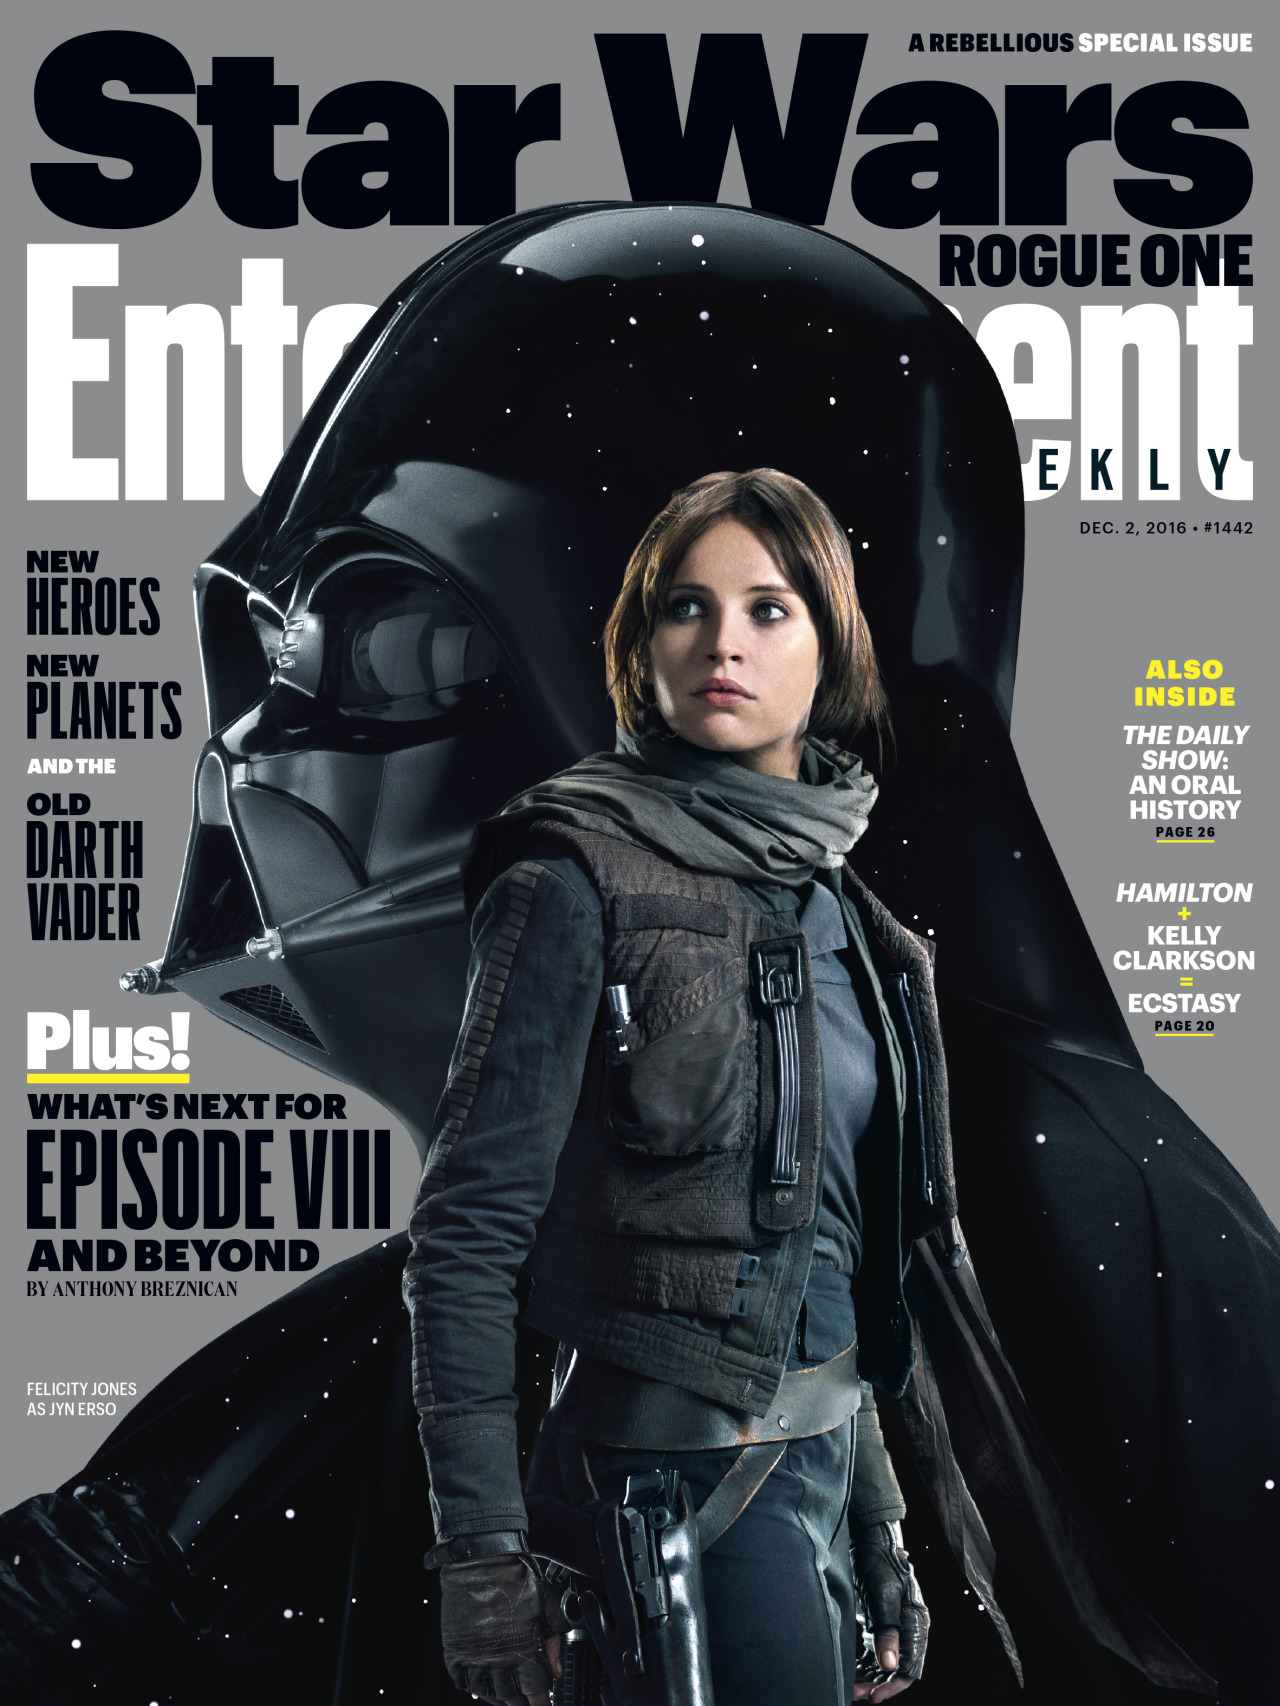 Go inside the making of Rogue One: A Star Wars Story
“Explore the music, characters and worlds of the first galactic stand alone film in our rebellious special issue and learn how Rogue One is reshaping the past – and future – of Star Wars!
”